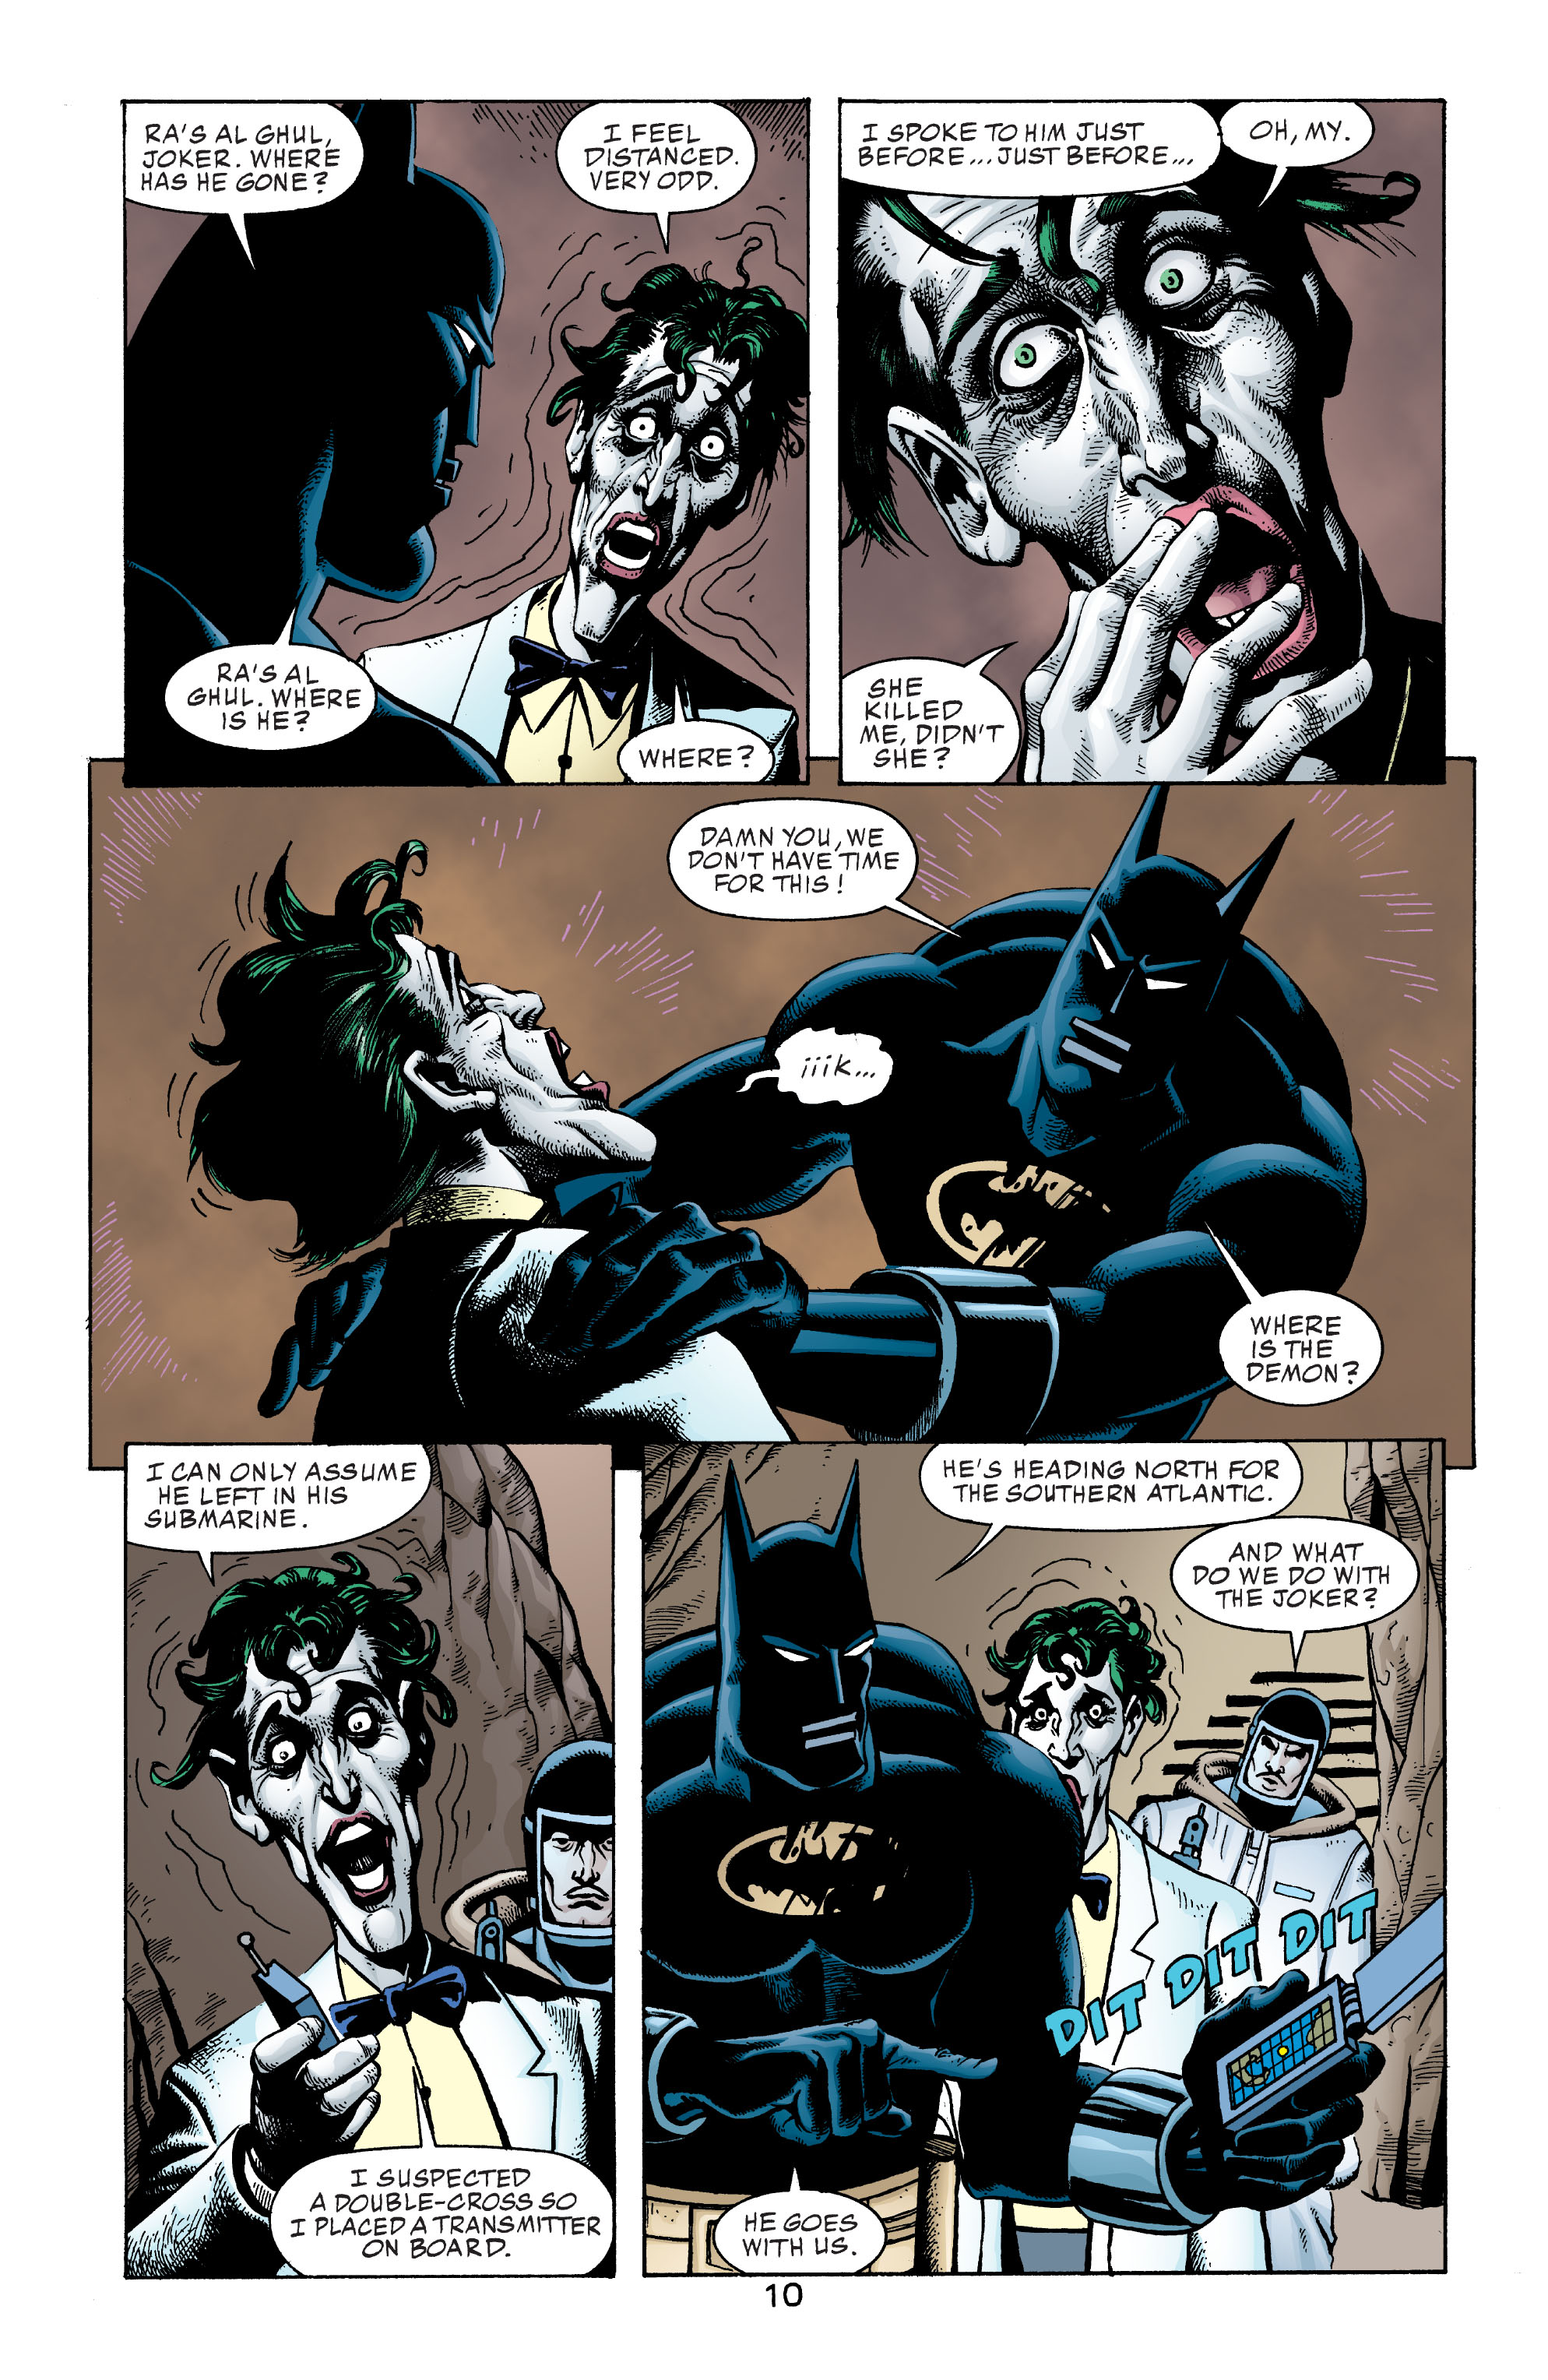 Batman Legends Of The Dark Knight Issue 145 | Read Batman Legends Of The Dark  Knight Issue 145 comic online in high quality. Read Full Comic online for  free - Read comics